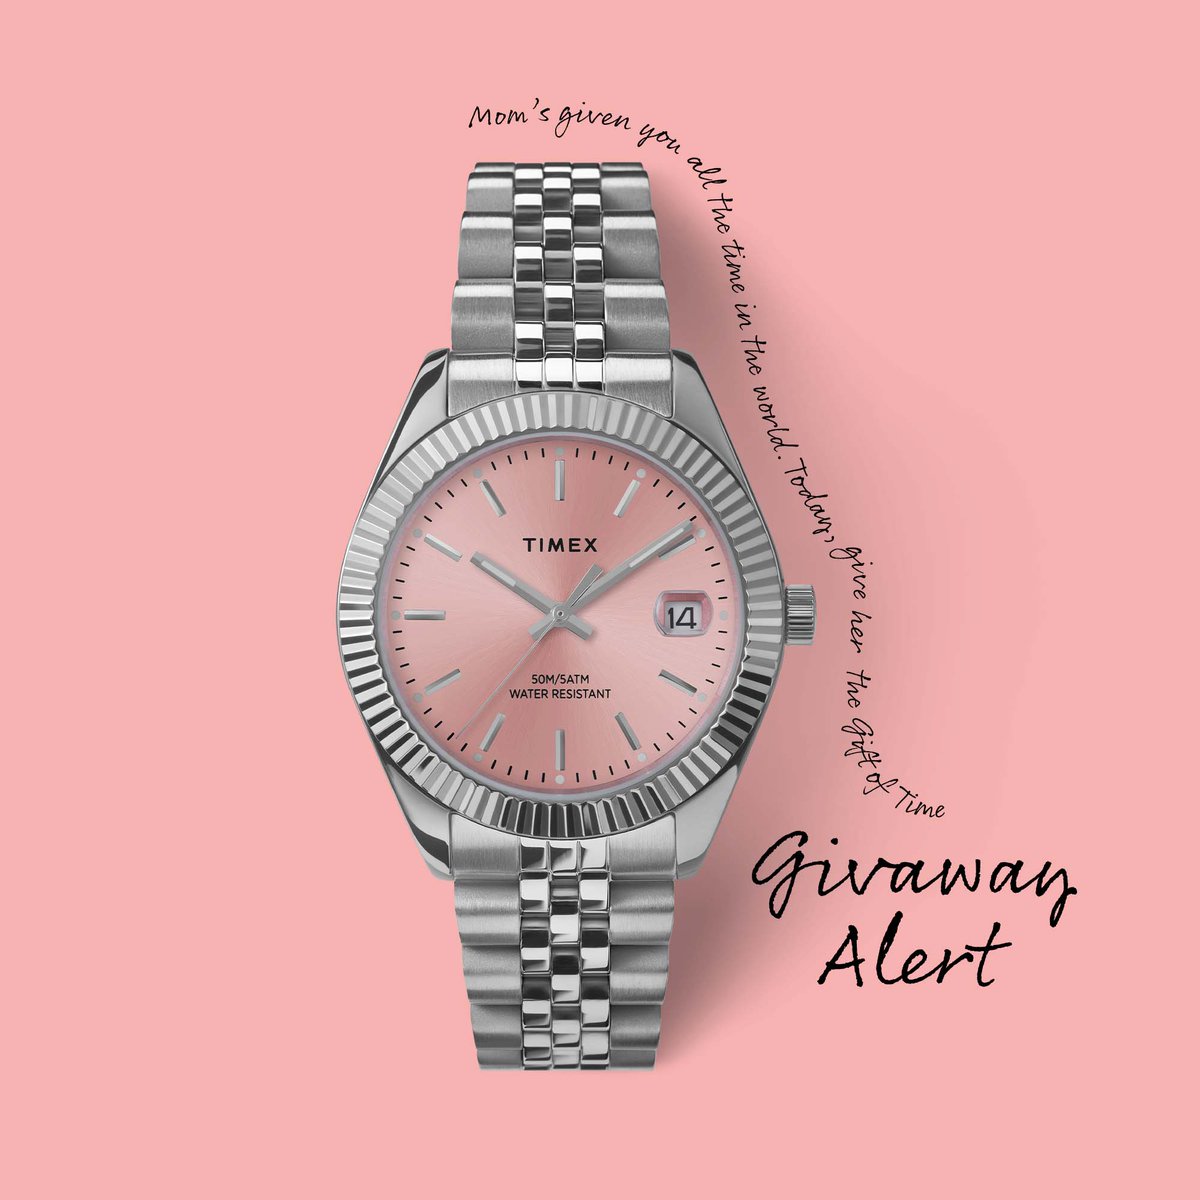 GIVEAWAY ALERT! Stand to win a Timex watch this Mother’s Day! 1️⃣ Follow Timex India FB & IG pages 2️⃣ Tag mum or a mother figure 3️⃣Tag @TimexIndia on Stories 4️⃣Last day: May 12. #Timex #TimexIndia #TimexWatches #ContestAlert #ContestAlertIndia #WinPrizes #MothersDayGiveAway